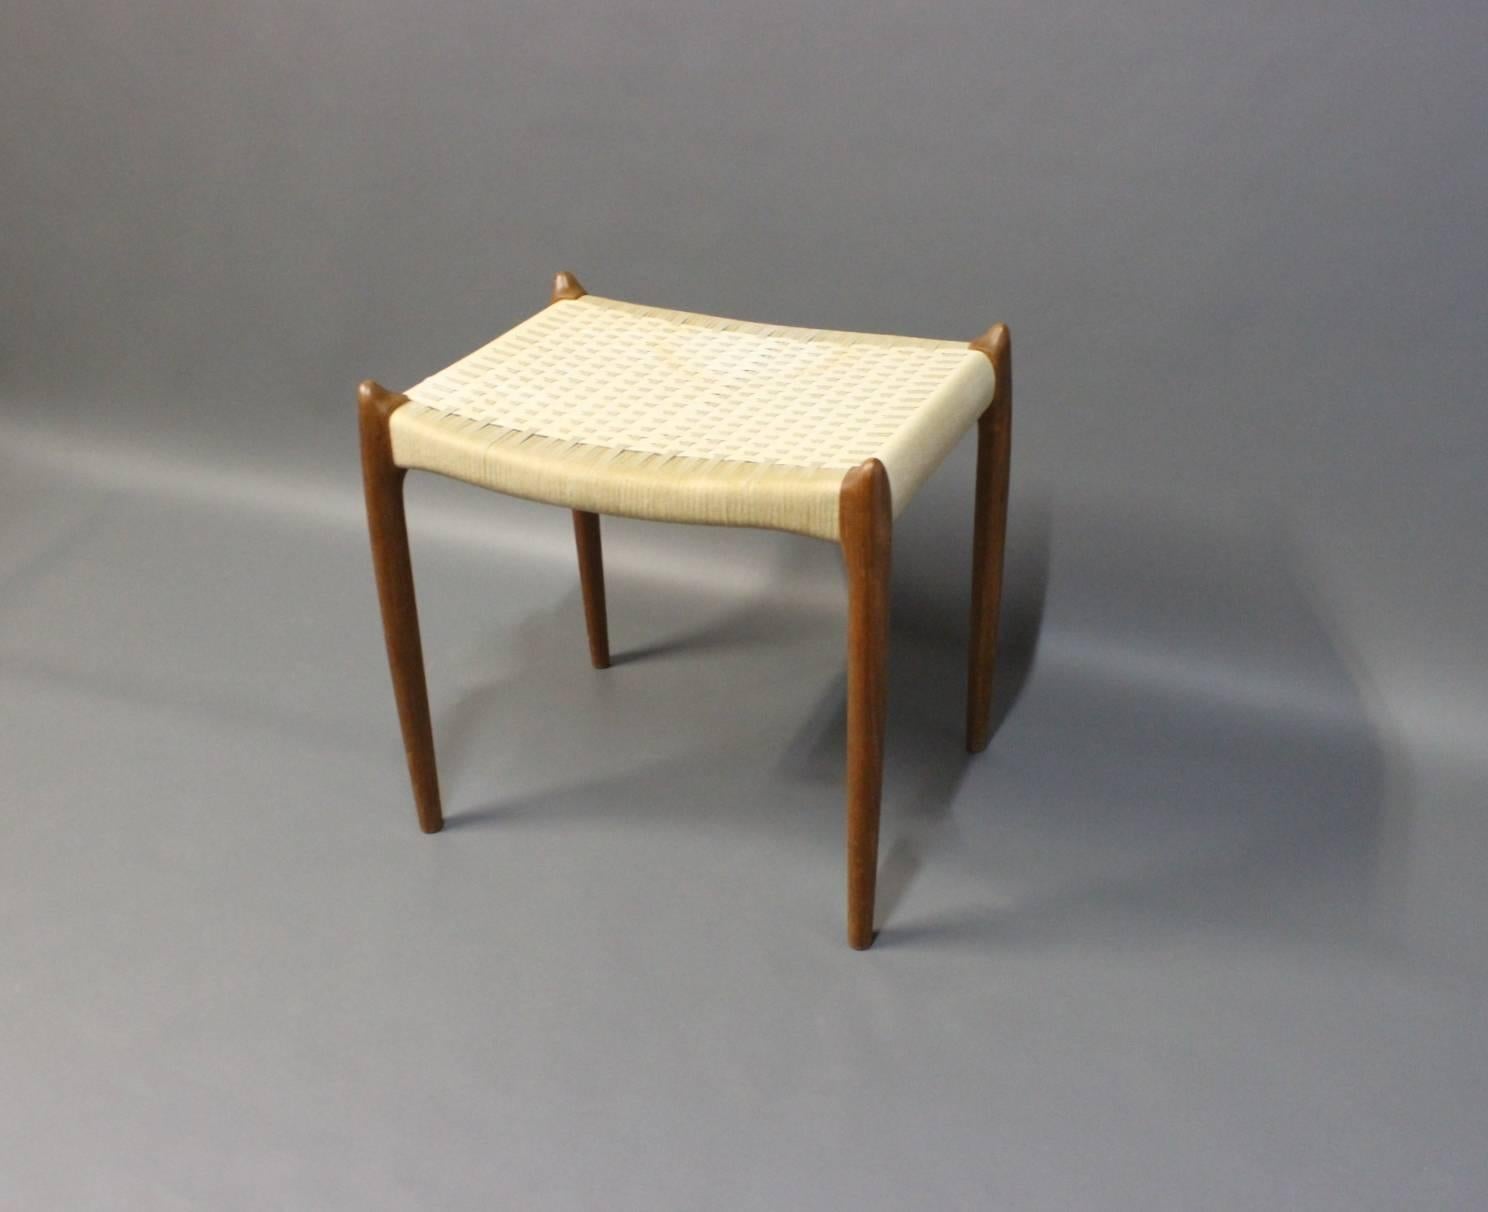 Small stool, model 80 A, with legs of teak and seat of white cord designed by NO. Møller and manufactured by J.L. Møller. The stool is of Danish design and from the 1960s.